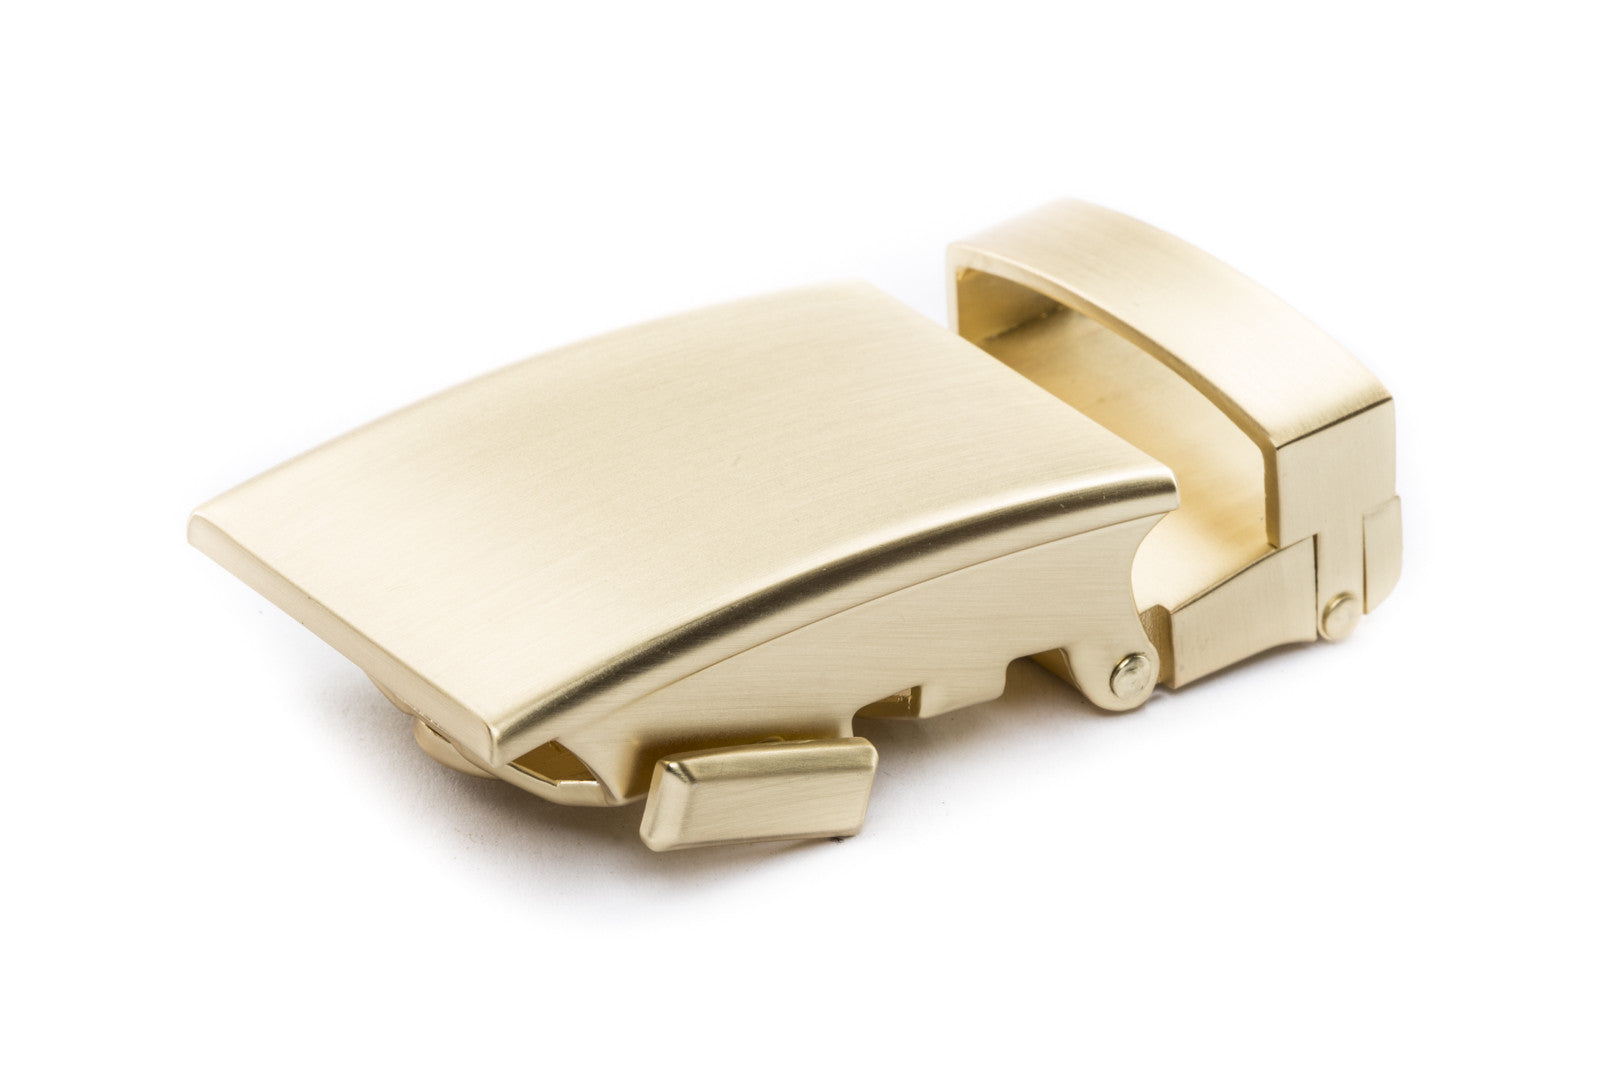 Men's classic ratchet belt buckle in matte gold with a 1.25-inch width.